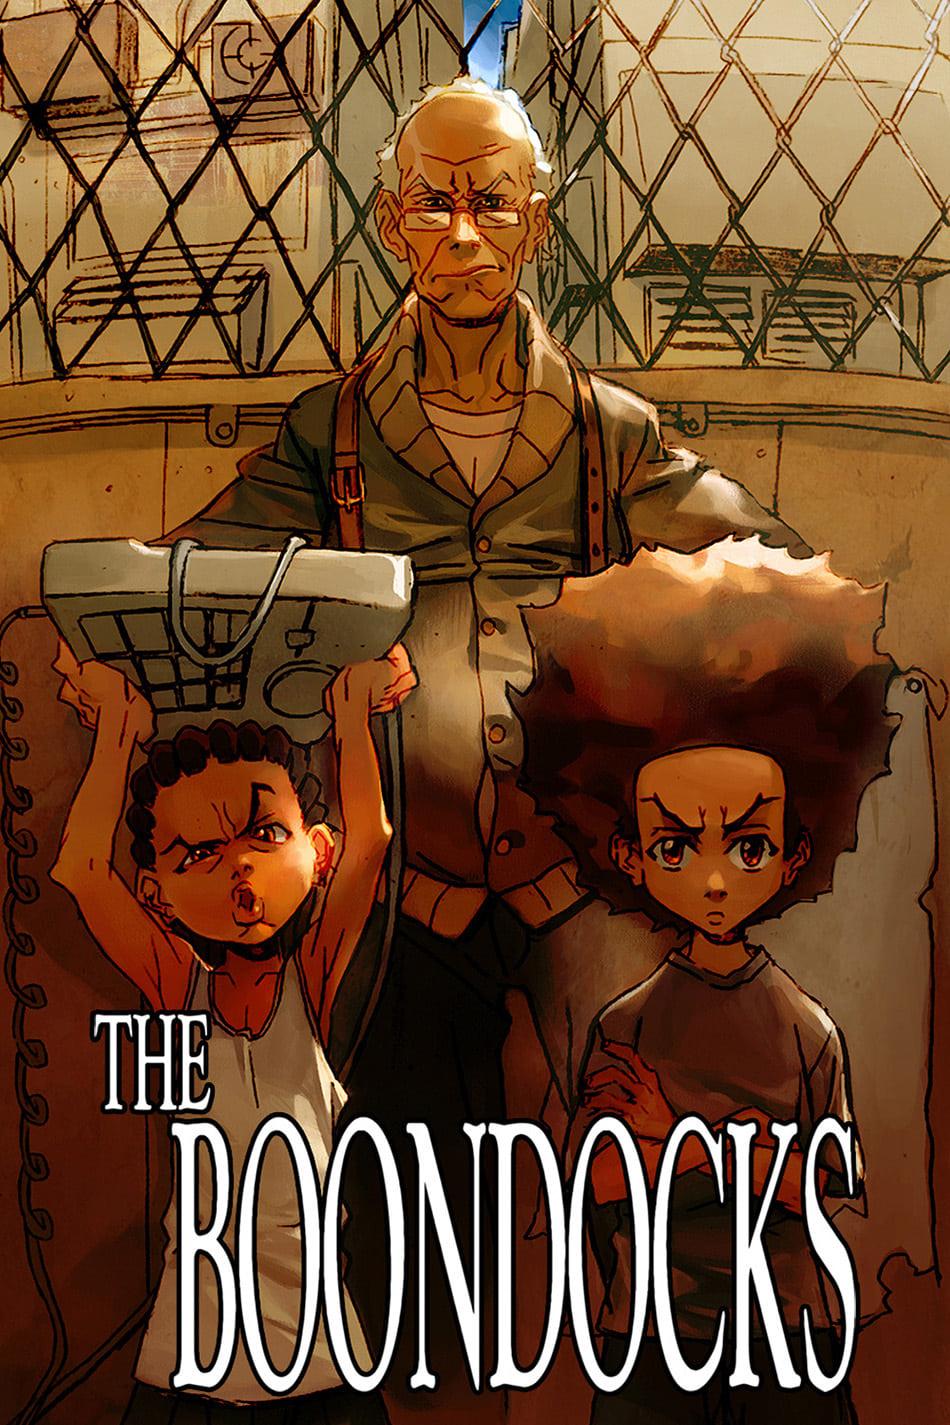 The Boondocks poster